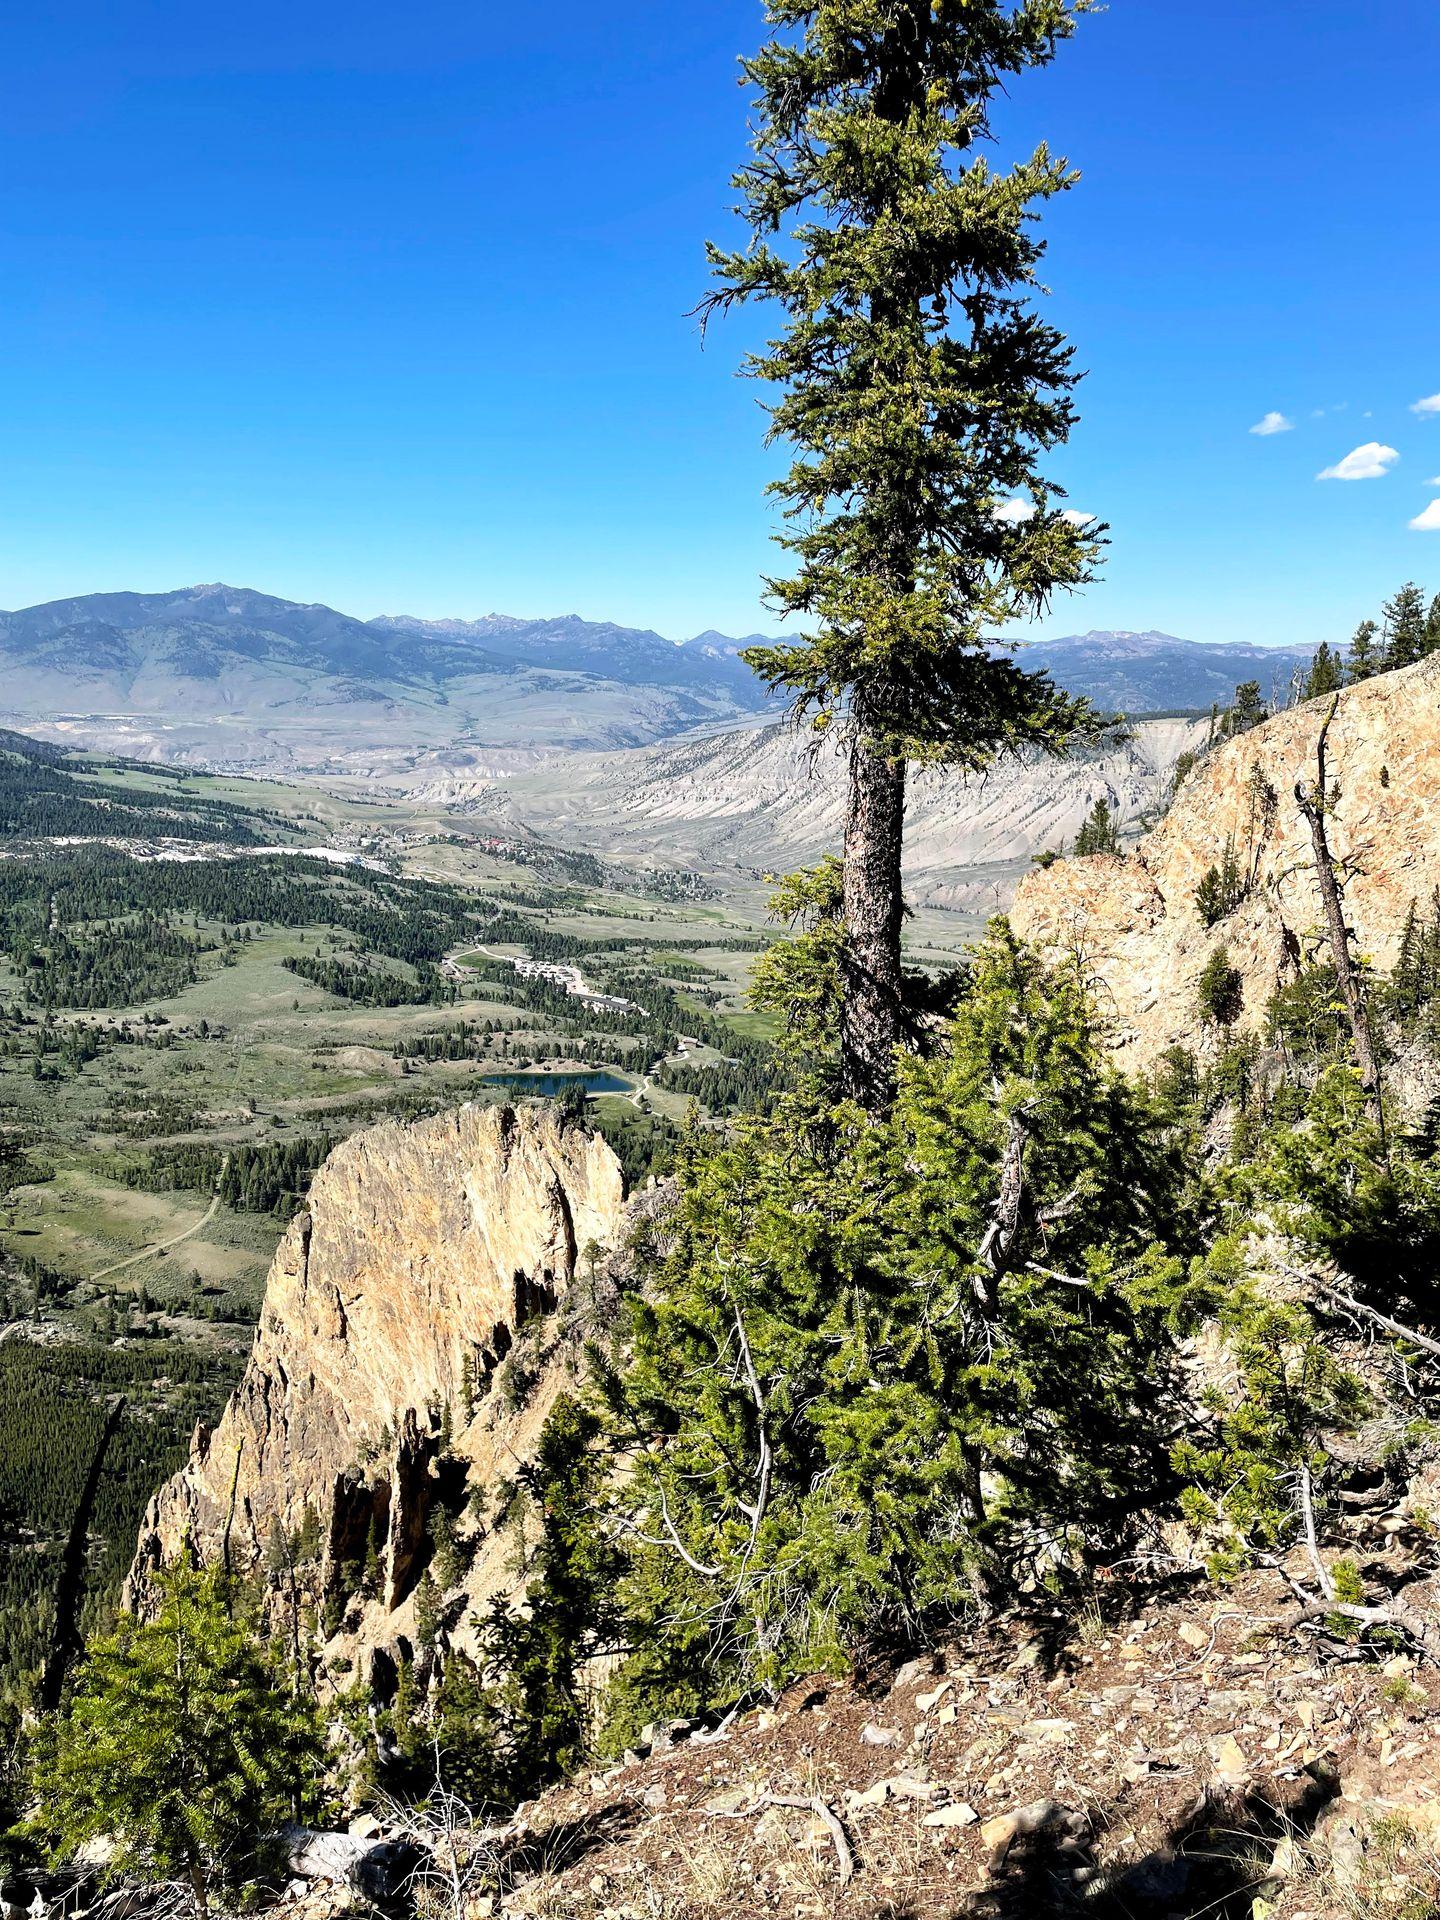 A view of a valley and mountains from the Bunsen Peak trail.